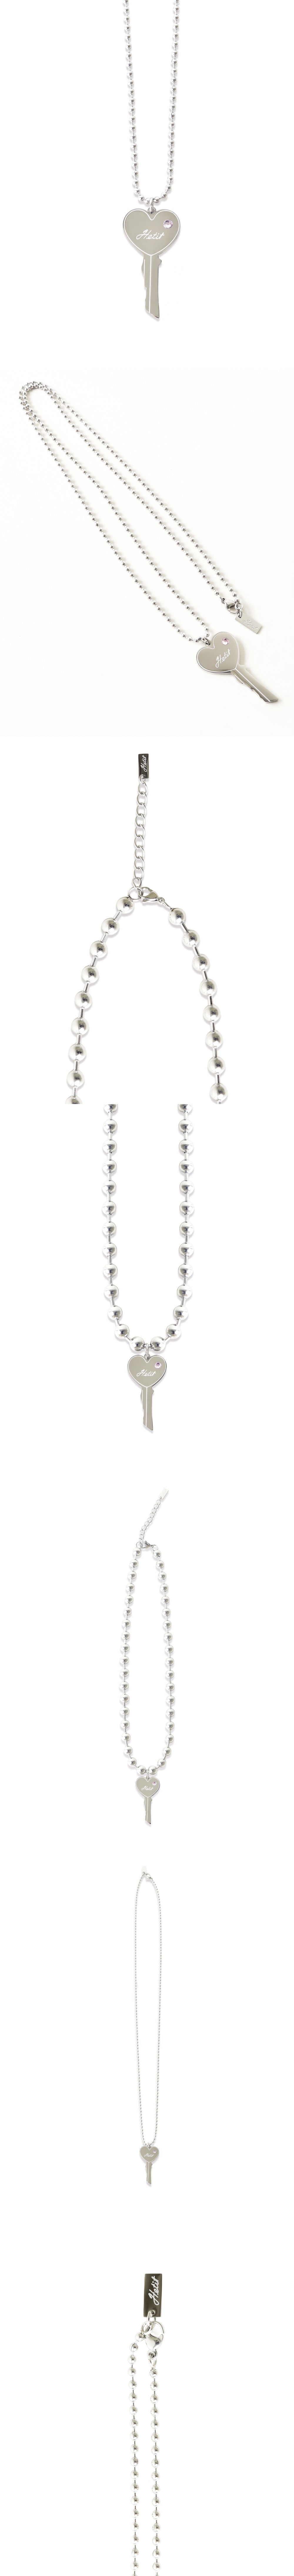 Bling Heart Key Necklace (Long Chain)